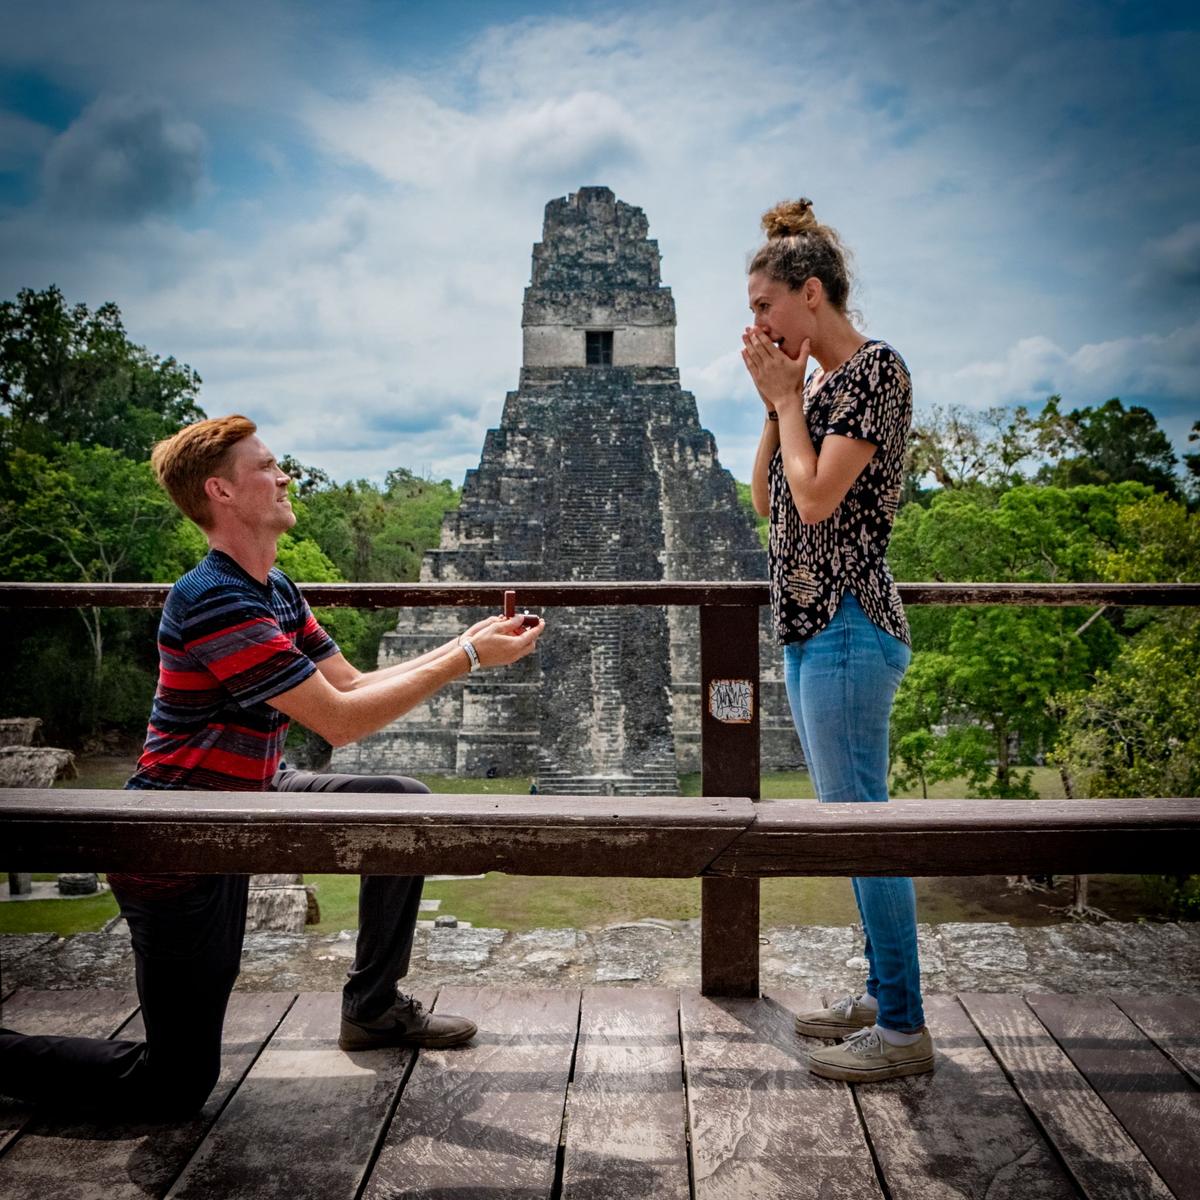 Trent proposes to Allie on top of a pyramid in Tikal, one of the largest Mayan ruins in a remote jungle in northern Guatemala. (Courtesy ofTrent and Allie)